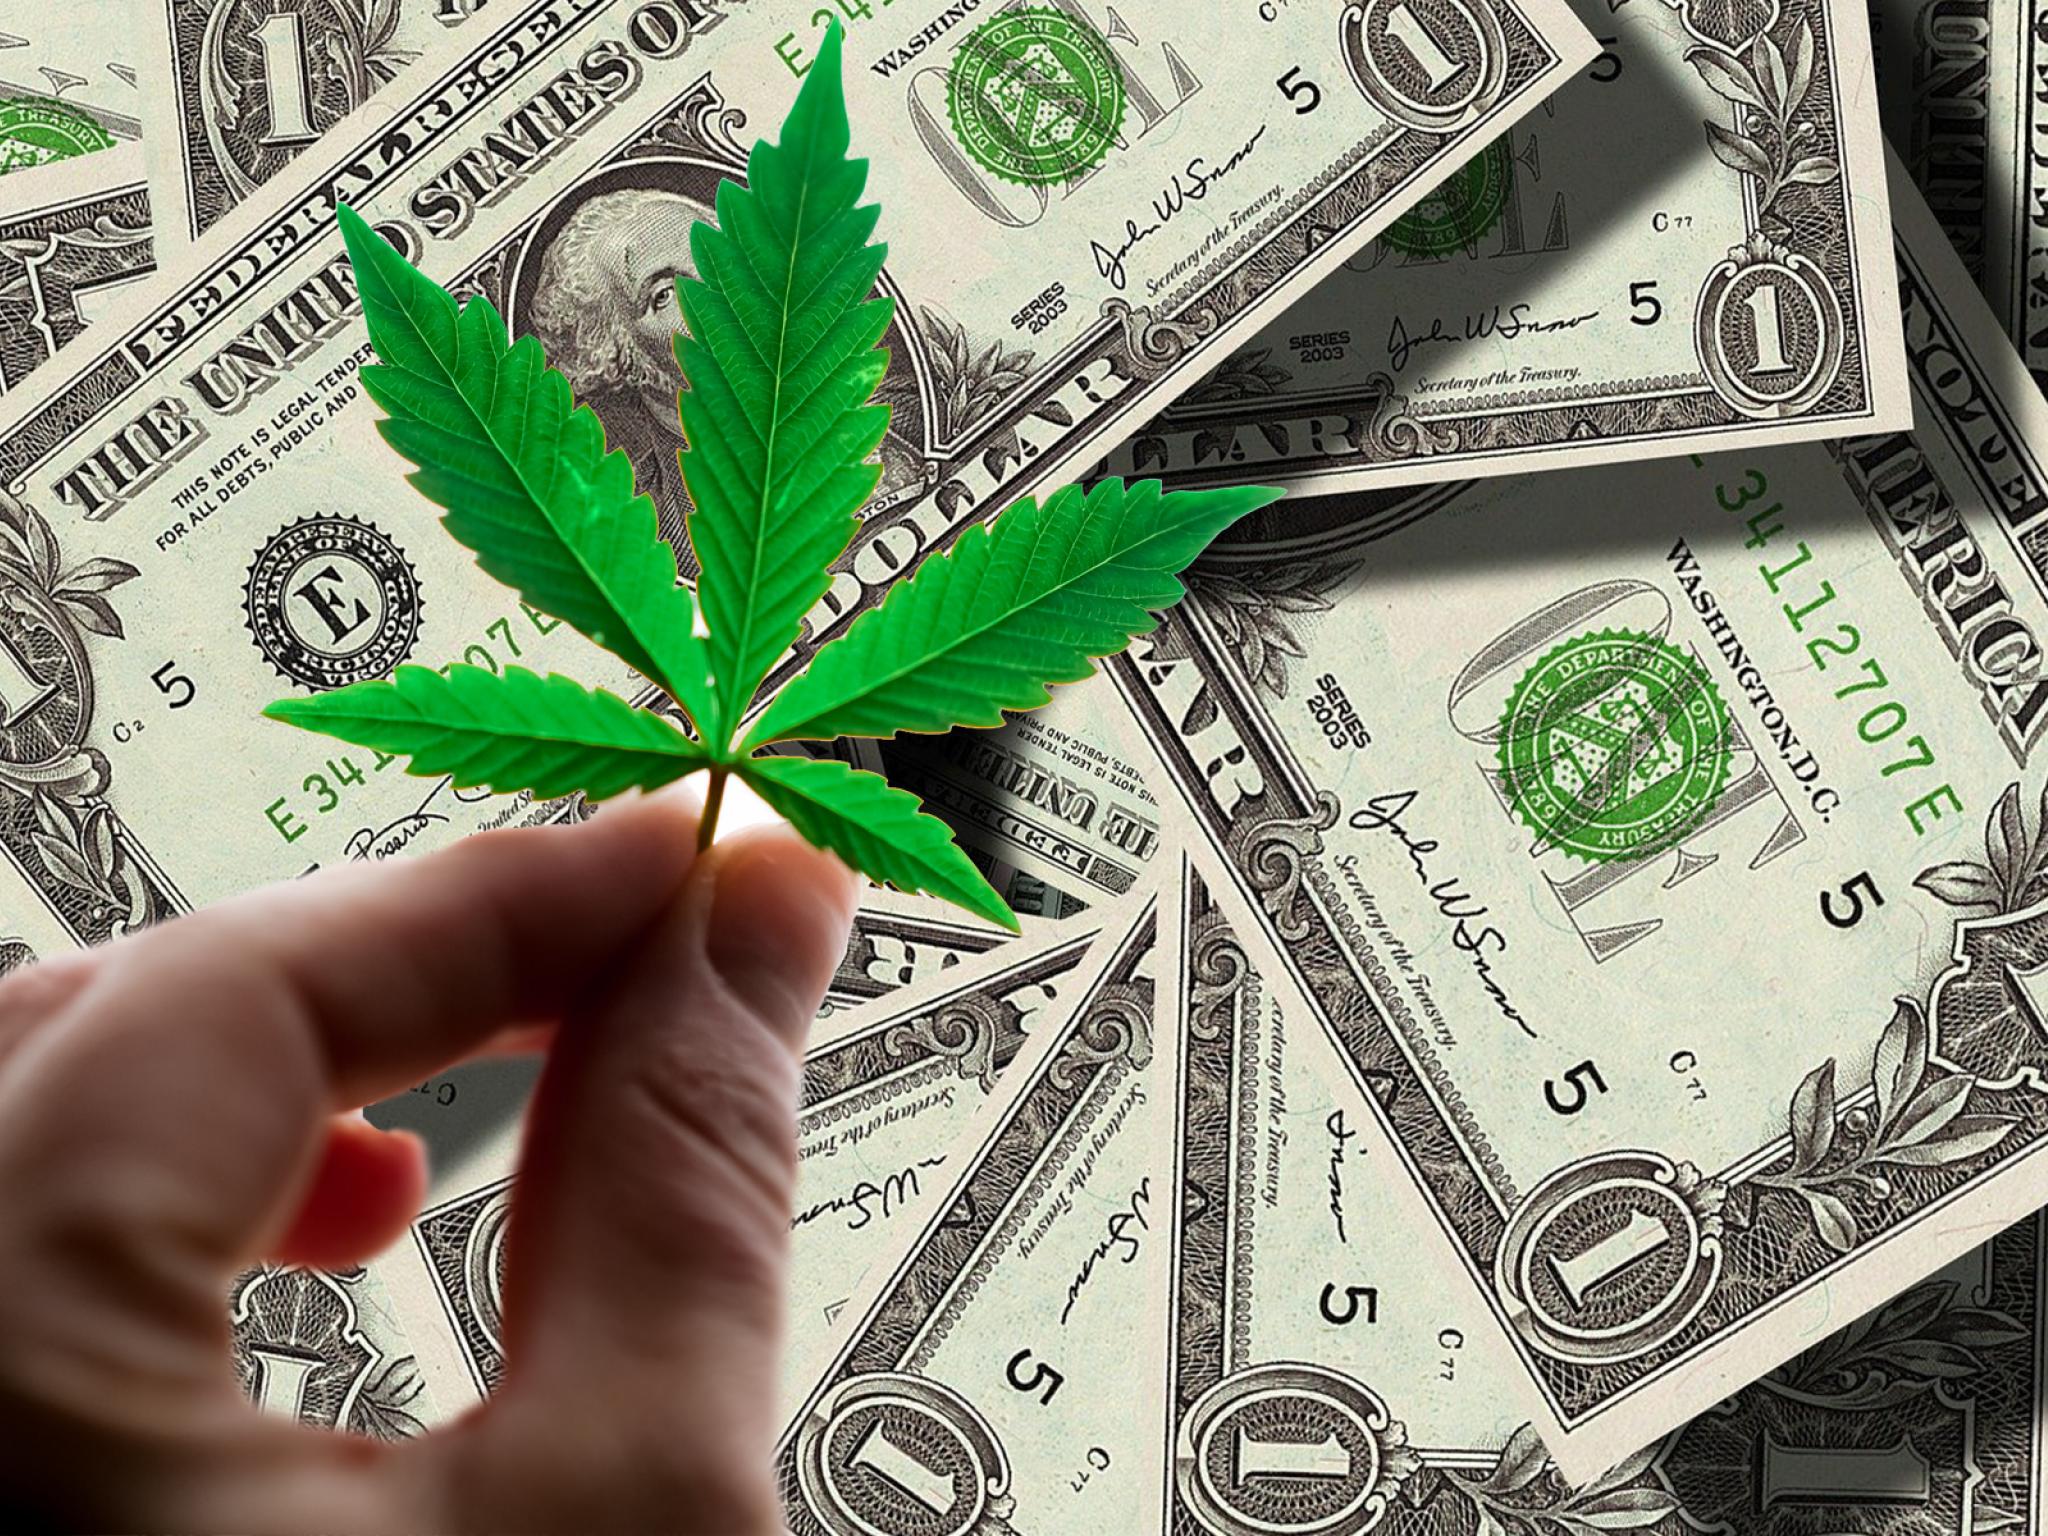  one-of-analysts-favorite-marijuana-stocks-says-farewell-to-debt-closes-587m-refinancing-deal 